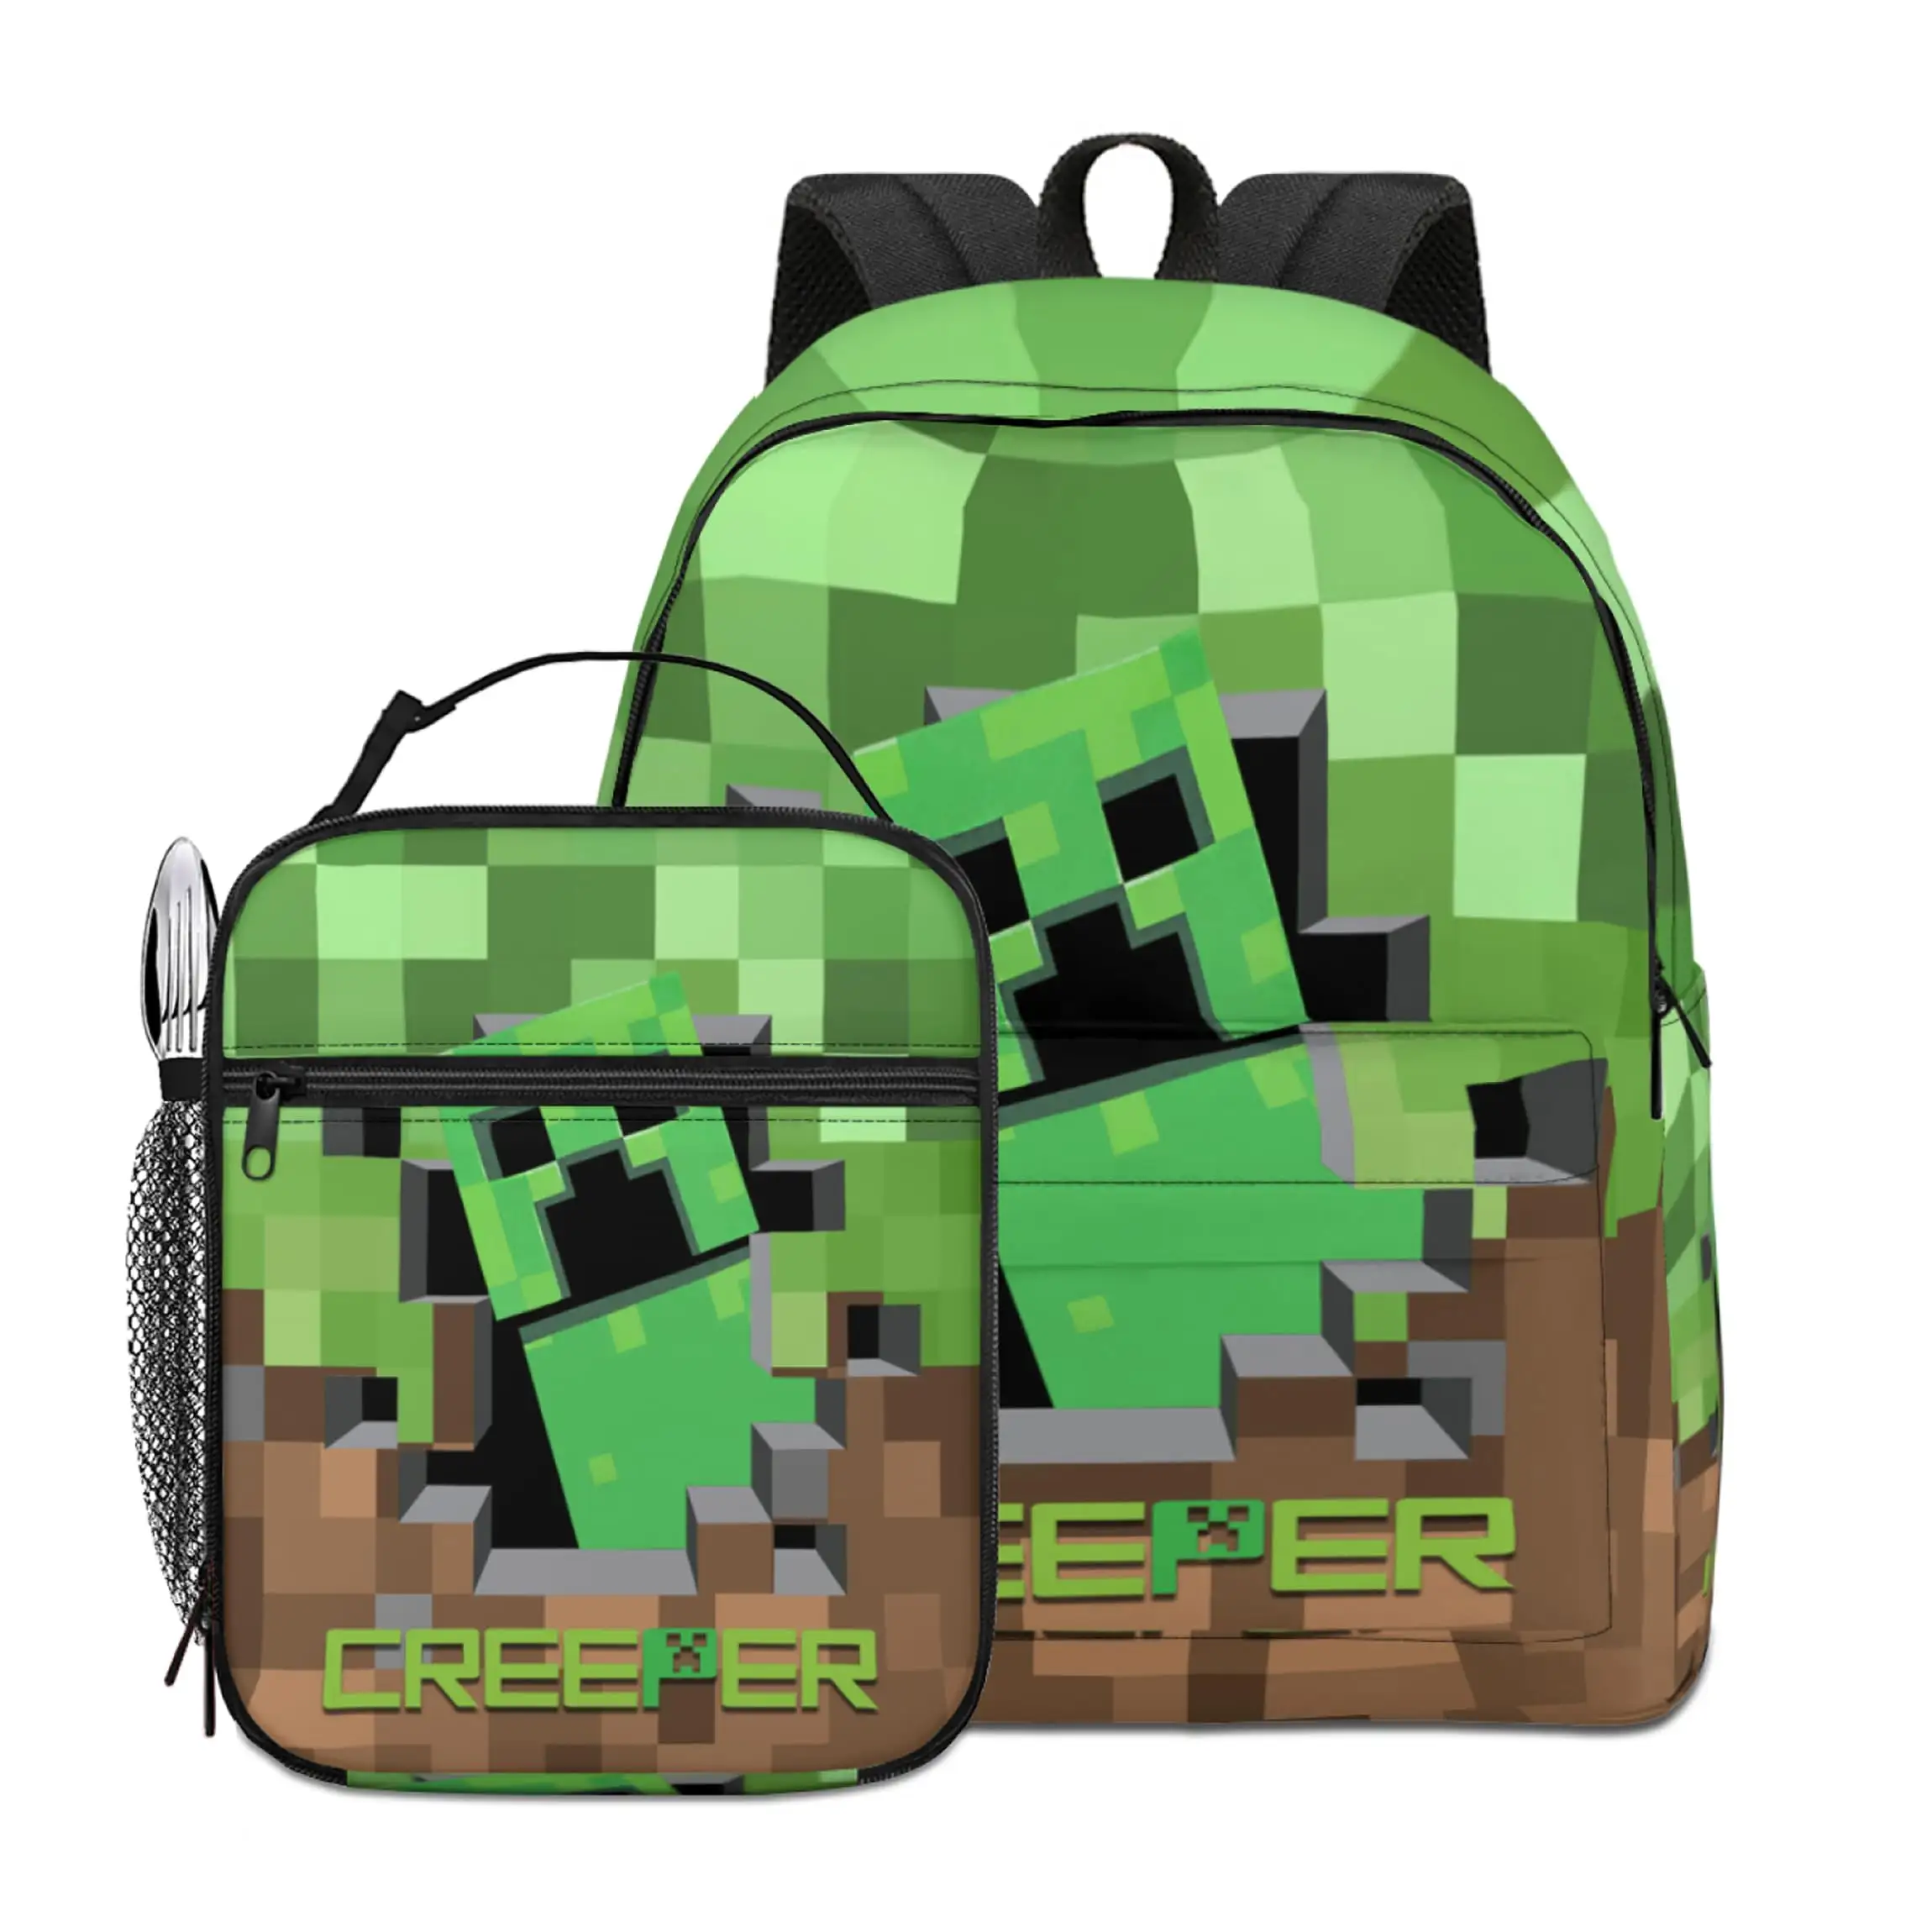 New Arrival Anime Game Minecrafts Computer Backpack Nylon Green Robloxs School Bag for Teenagers Children